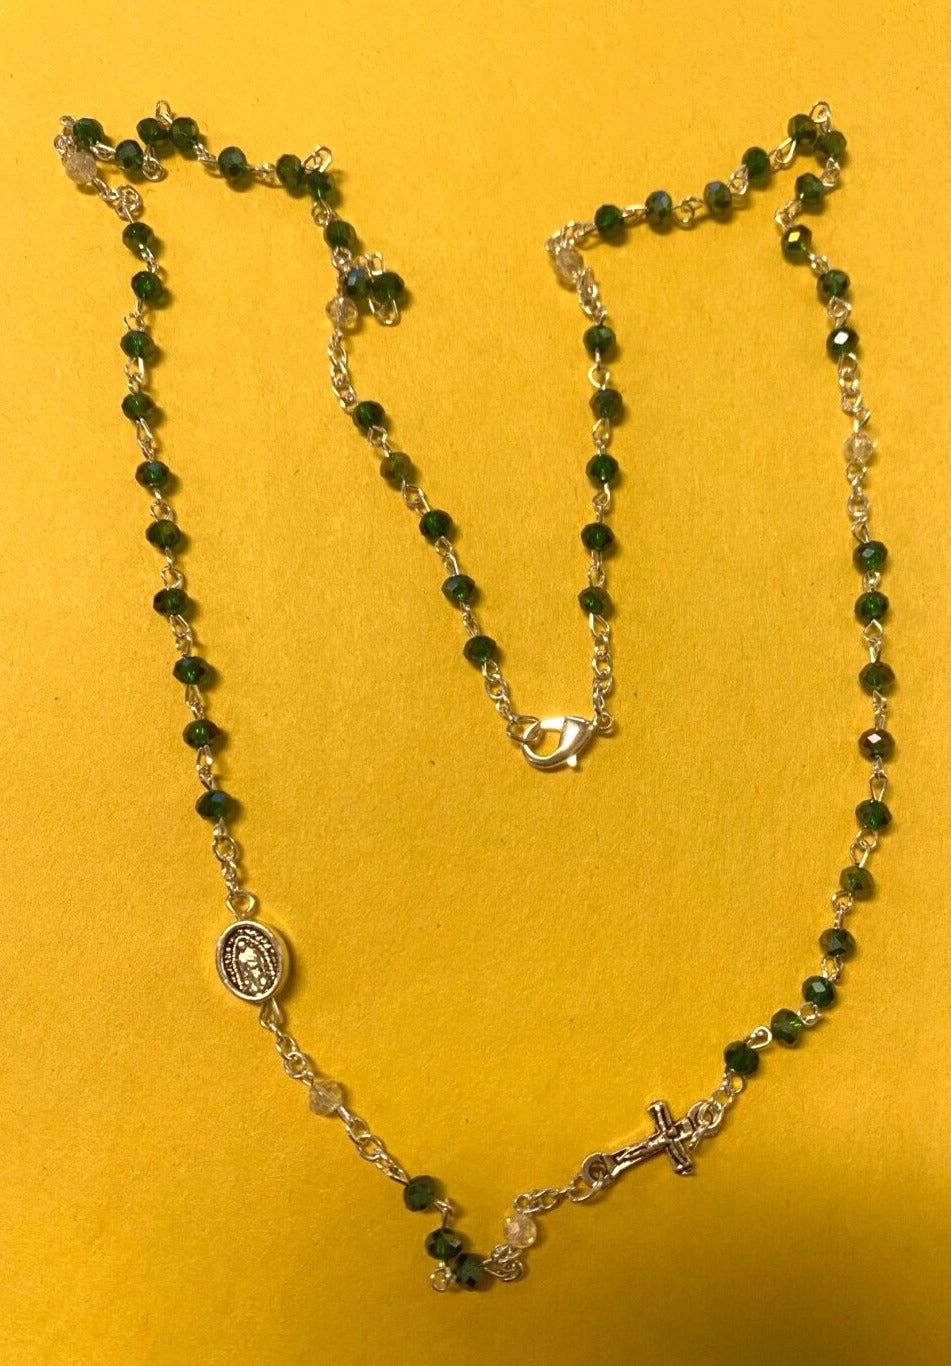 Our Lady of Guadalupe Green Glass Beads Rosary Necklace, New